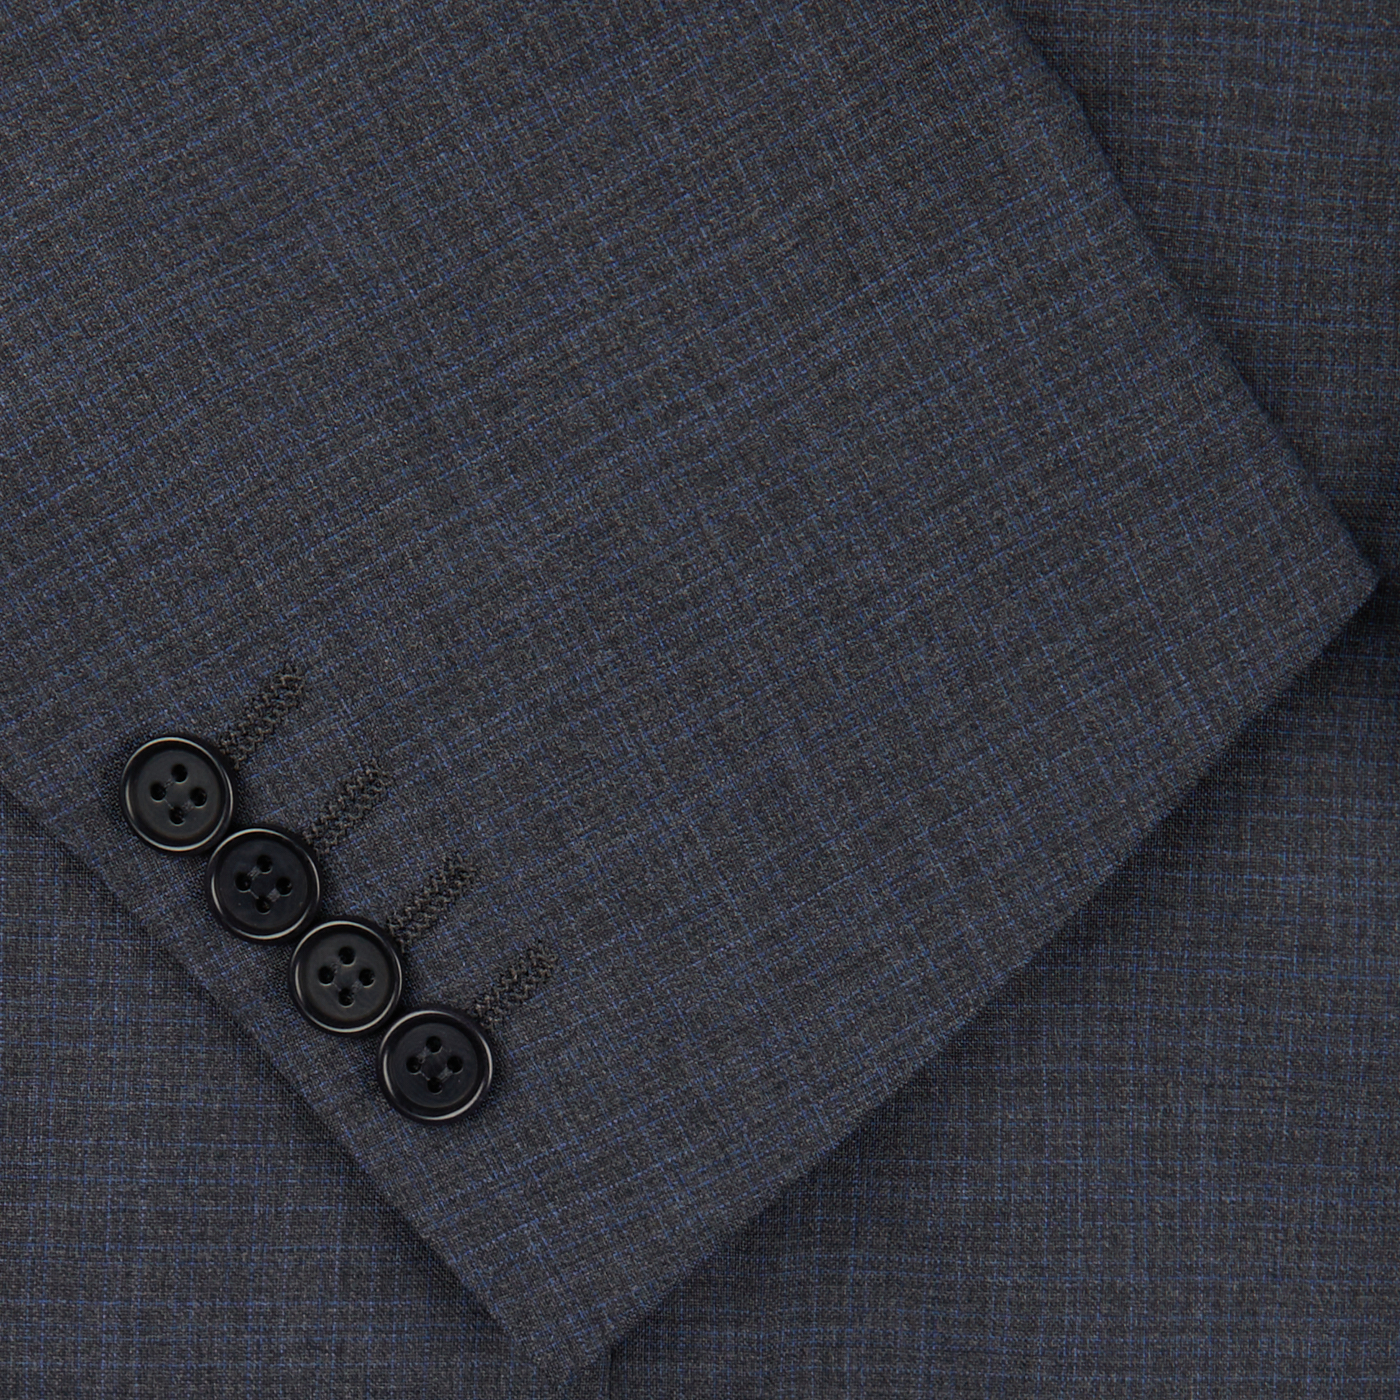 Close-up photo of a dark gray Canali Grey-Blue Melange Wool Suit fabric with a set of black buttons arranged in a line on it.